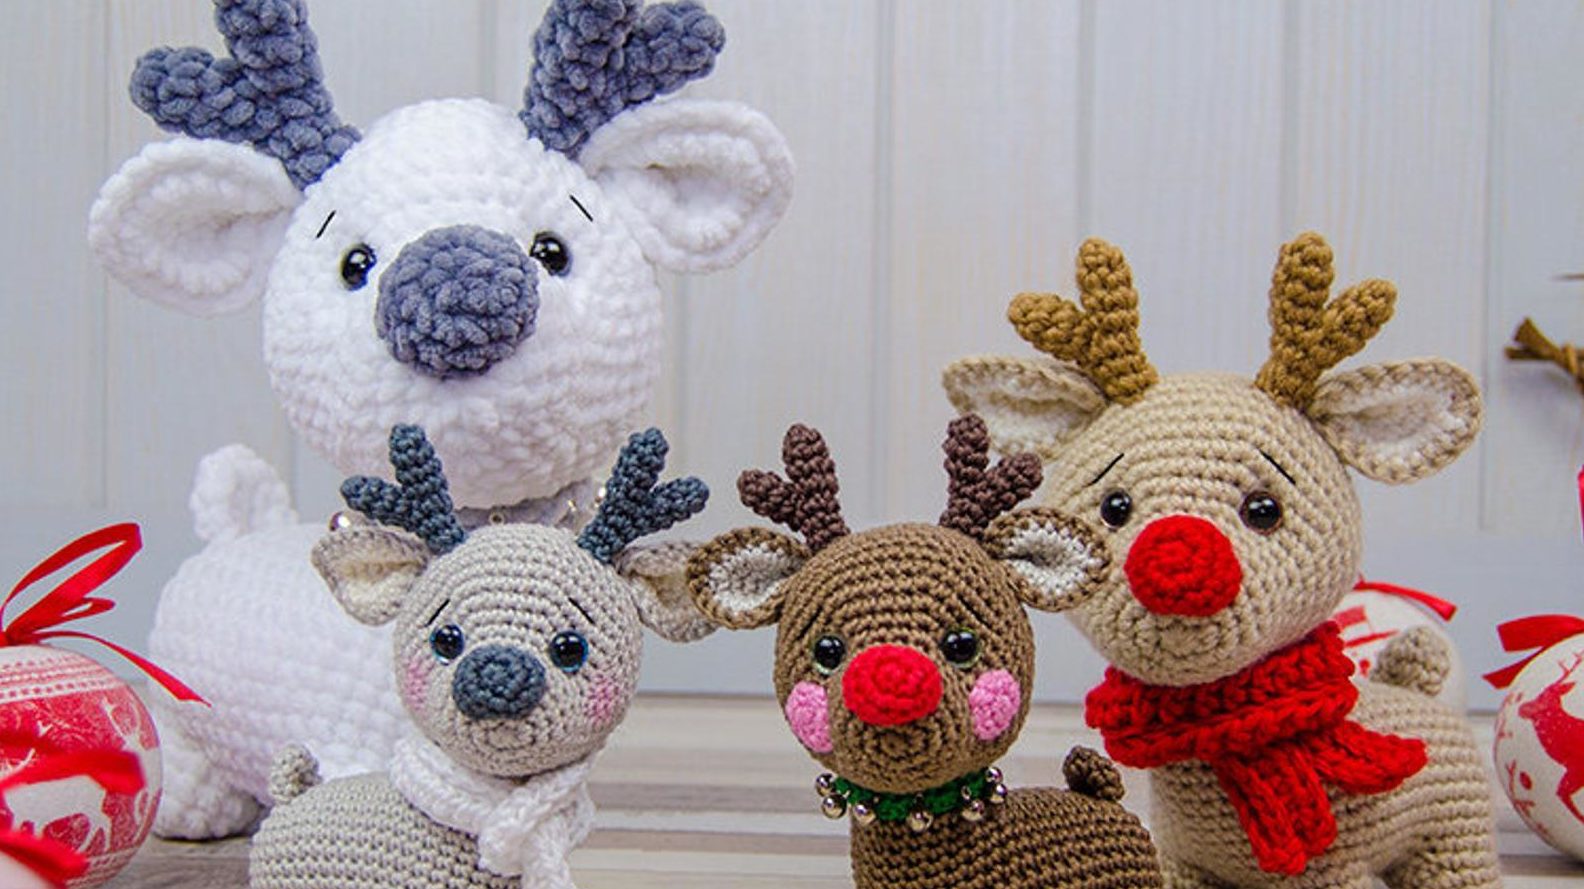 Adorable crochet reindeer would make a great holiday gift